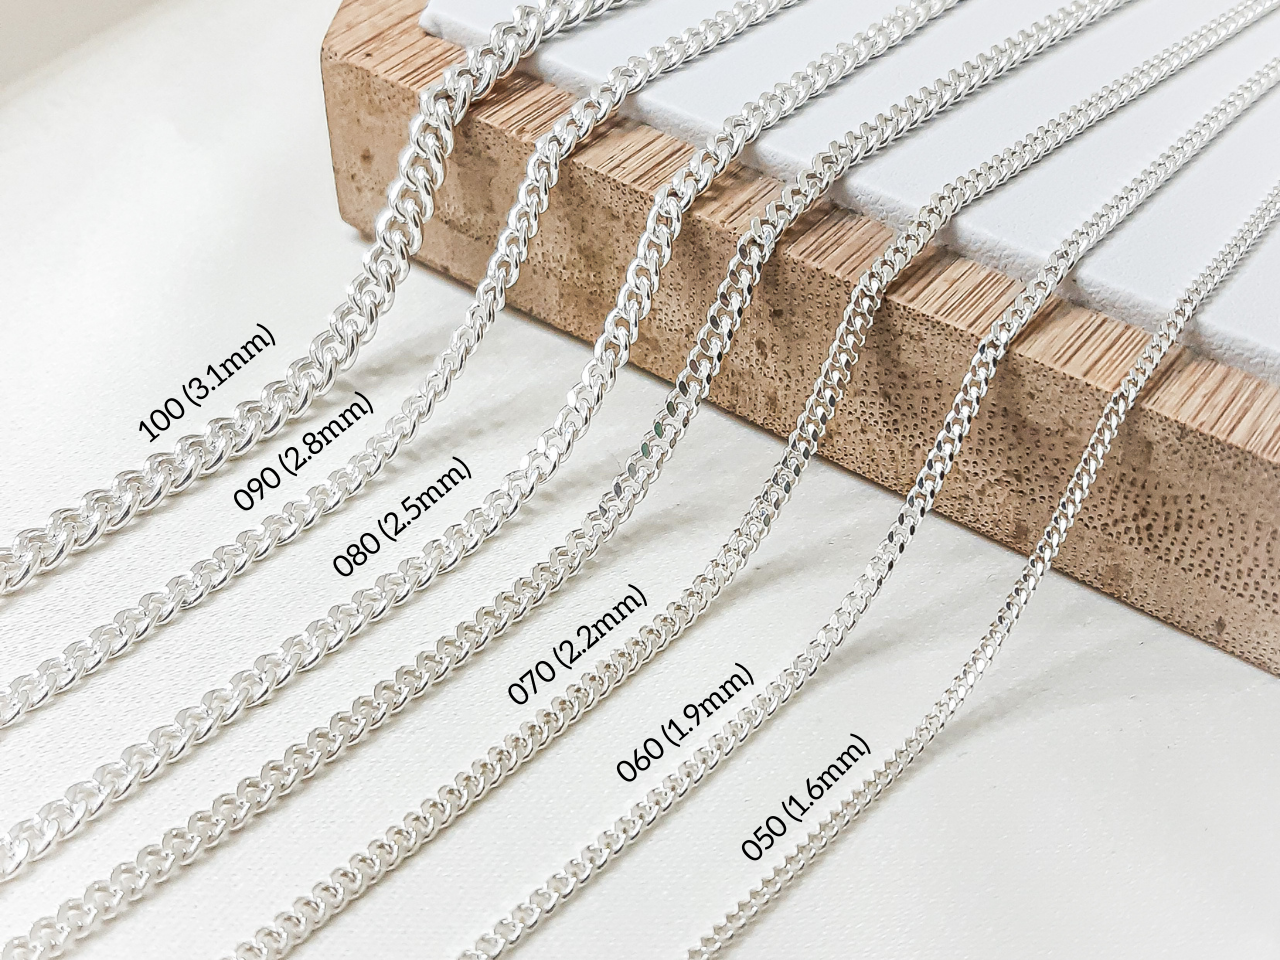 Curb Chain Necklace 990 Silver